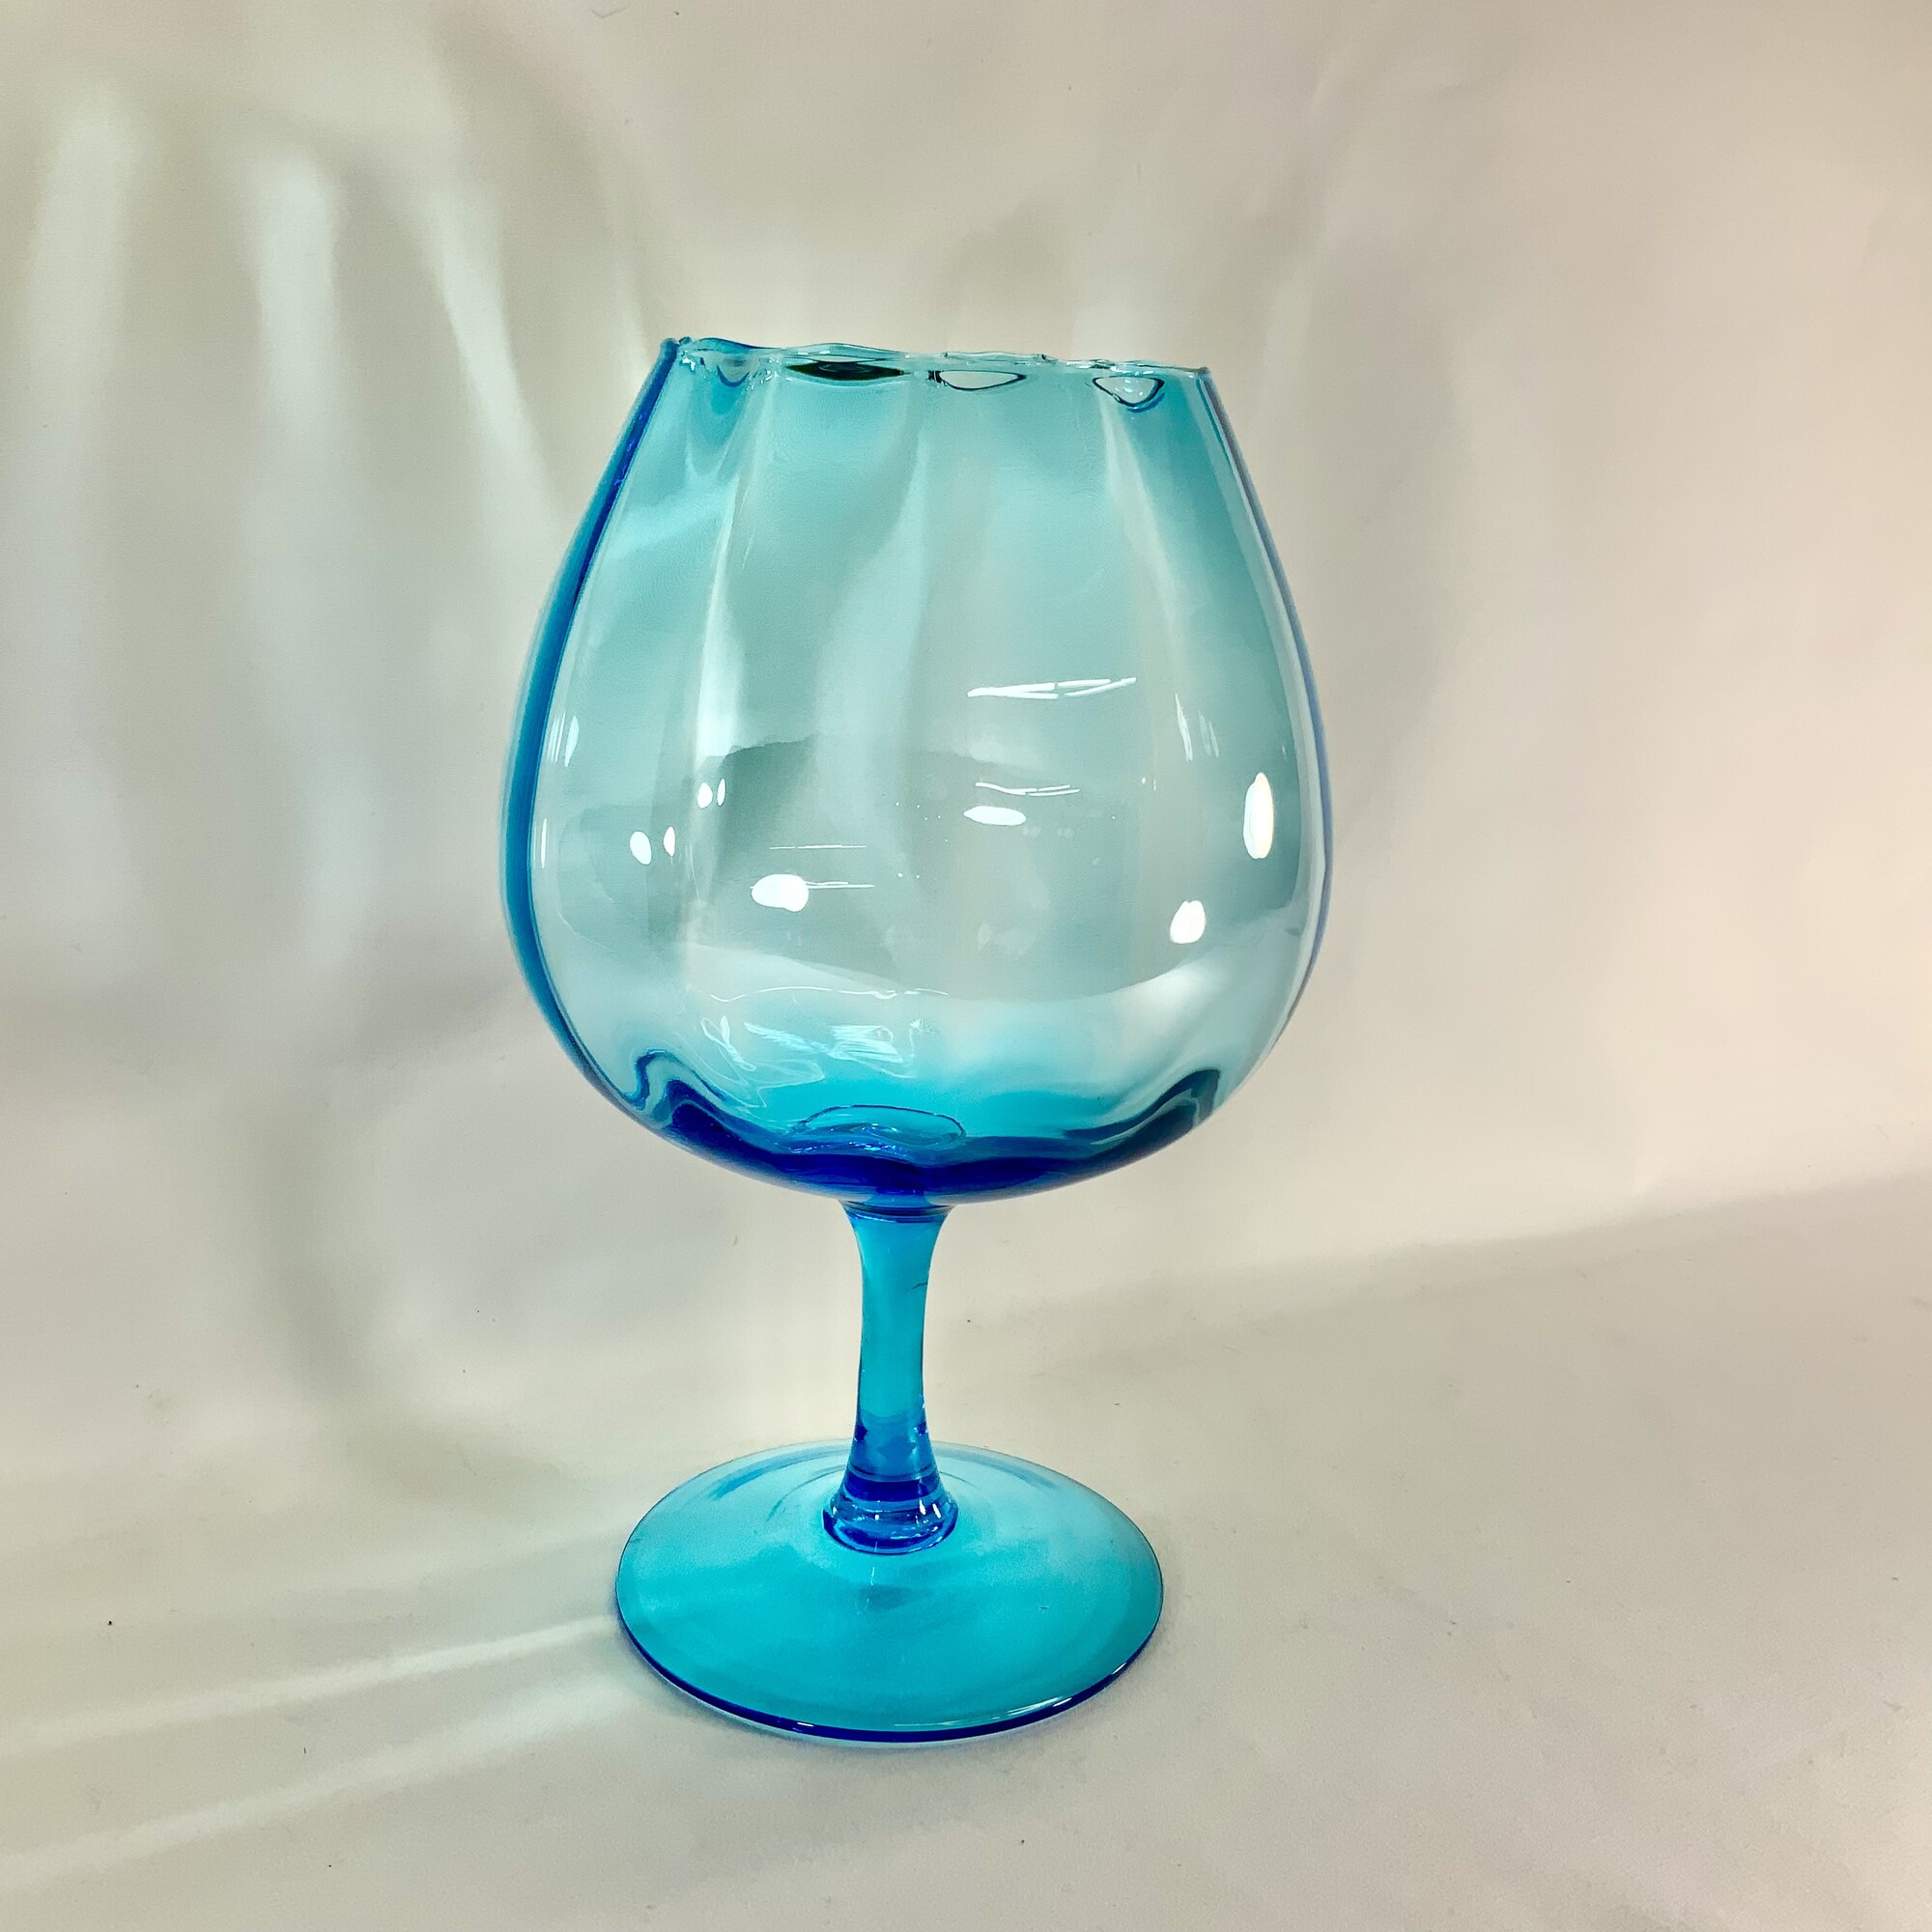 Retro clear blue glass vase. Approximately 11 inches H.